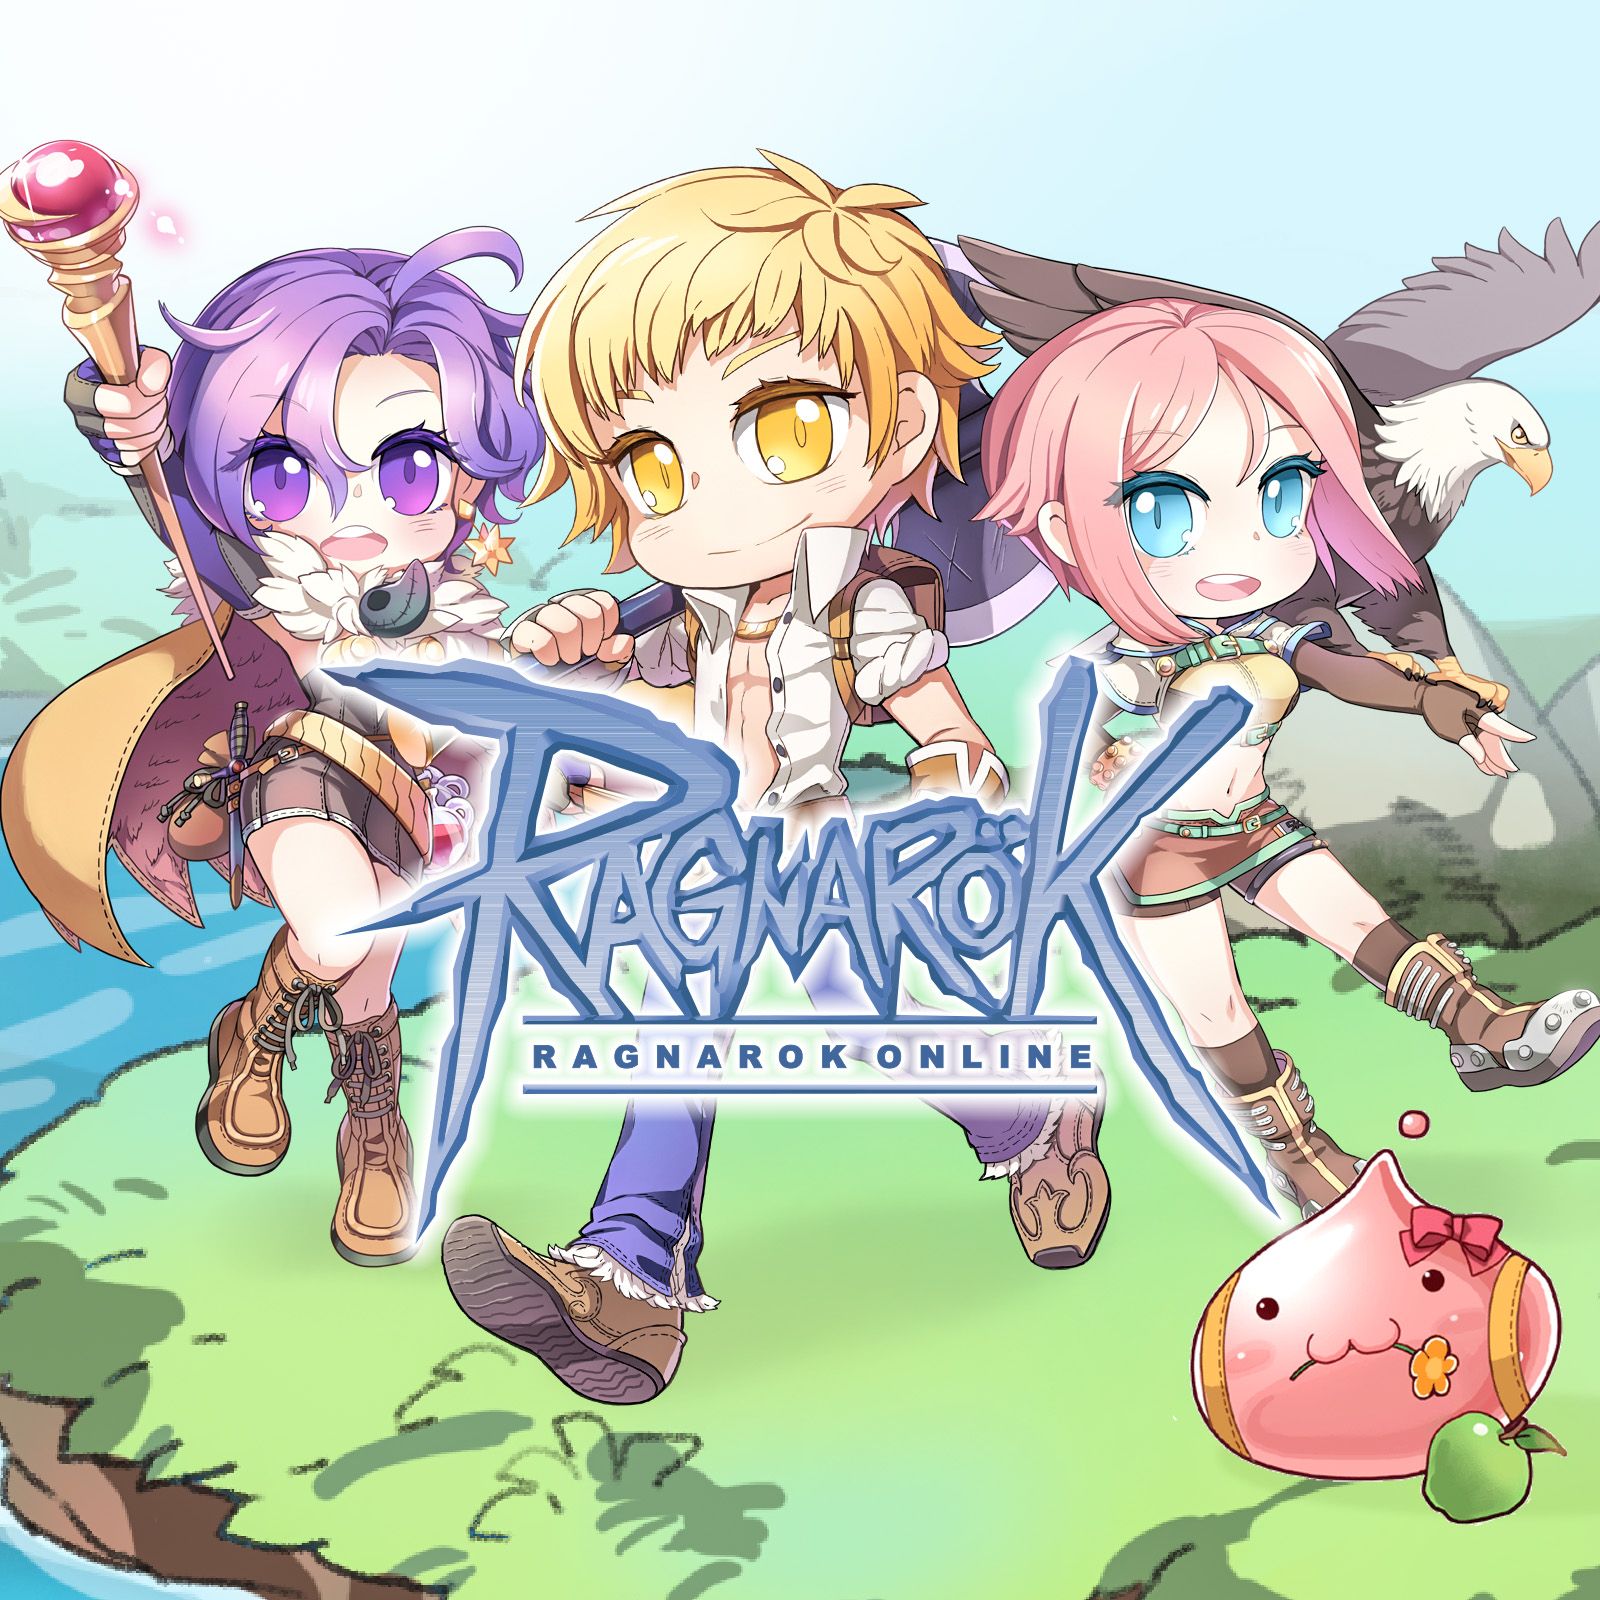 How to create 2D characters in 3D World like Ragnarok Online